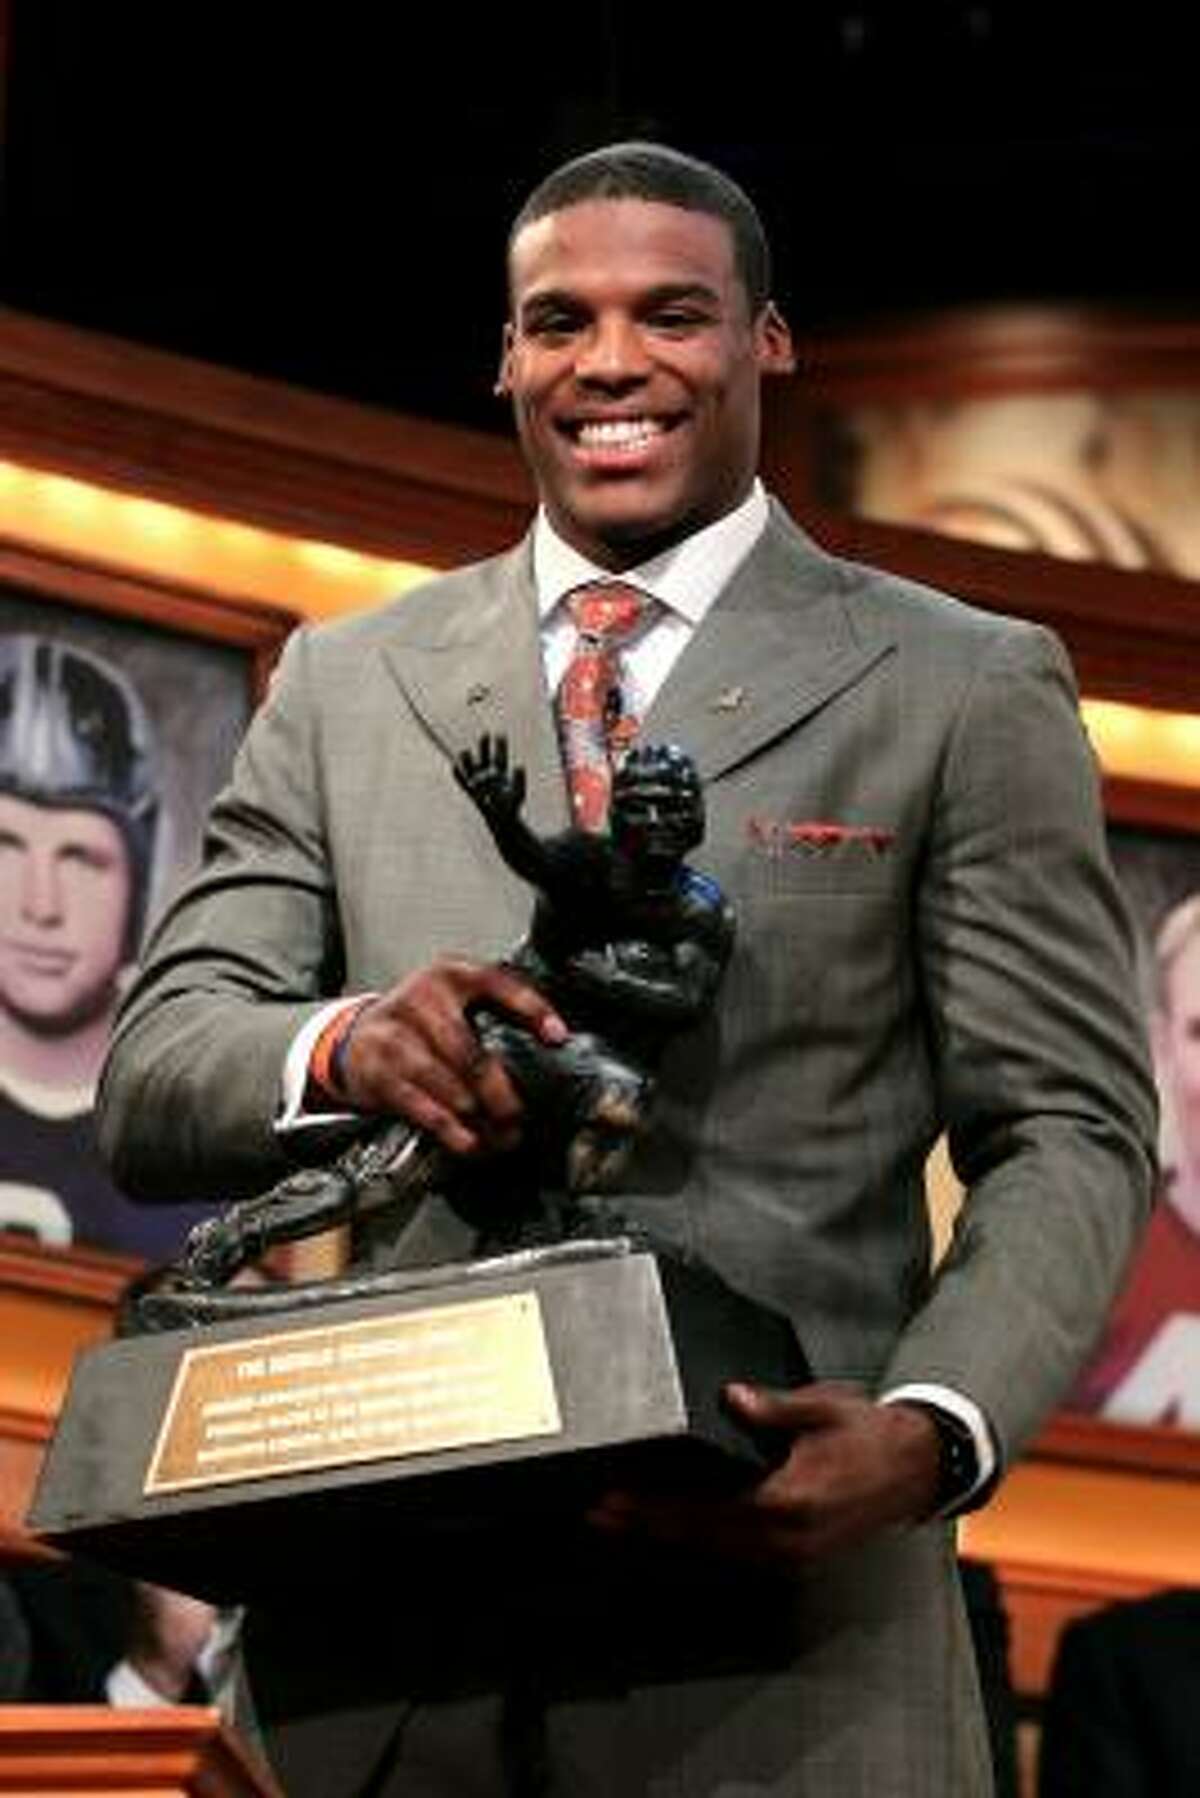 Auburn quarterback Cam Newton poses with the trophy after being named the 76th Heisman Memorial Trophy Award winner on Saturday night in New York City.